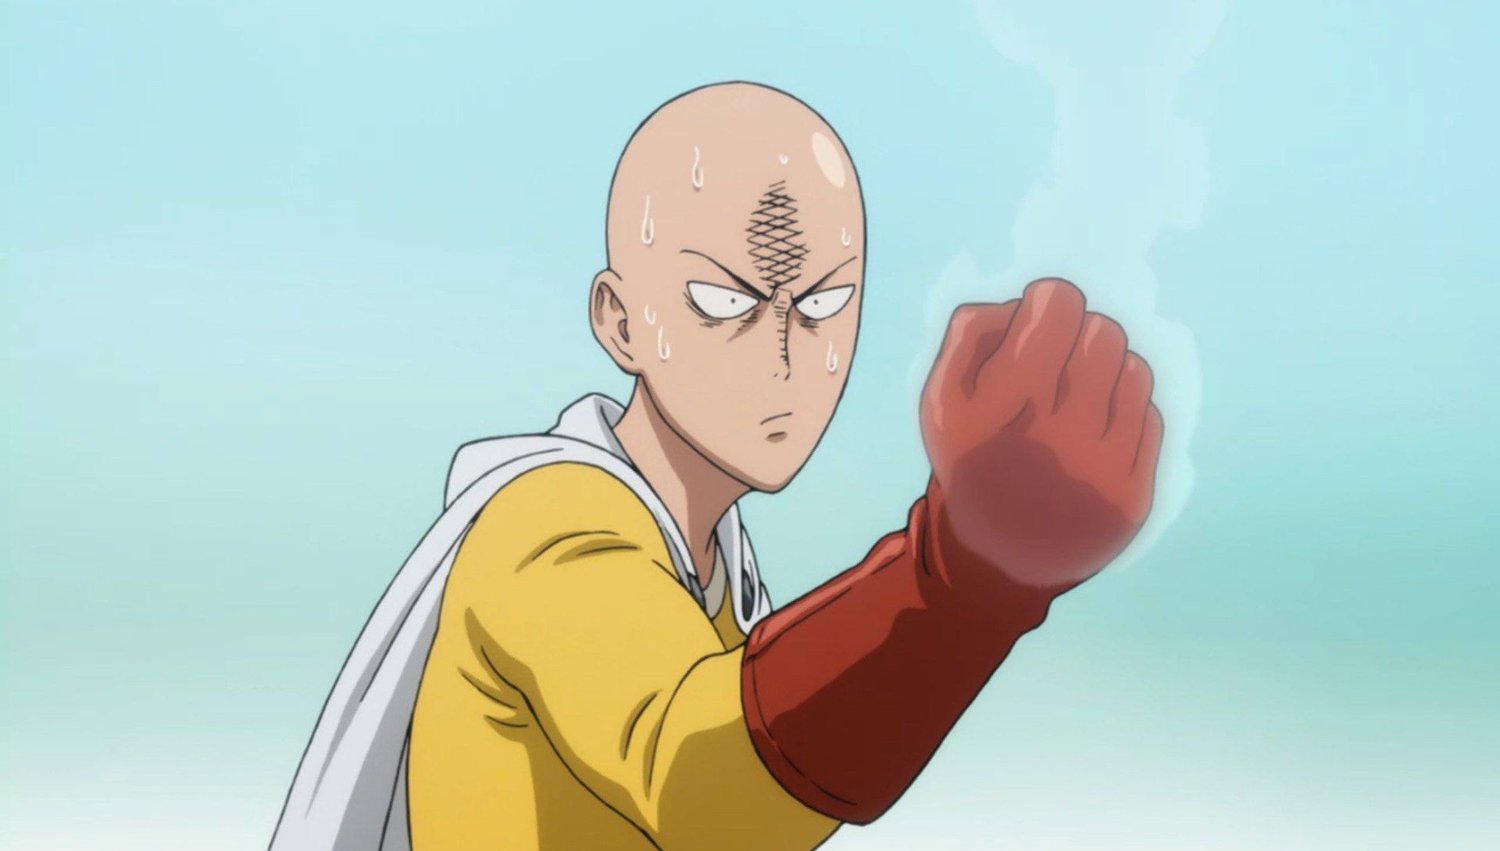 One-Punch Man Season 2 Premiere Date & Streaming Service Revealed